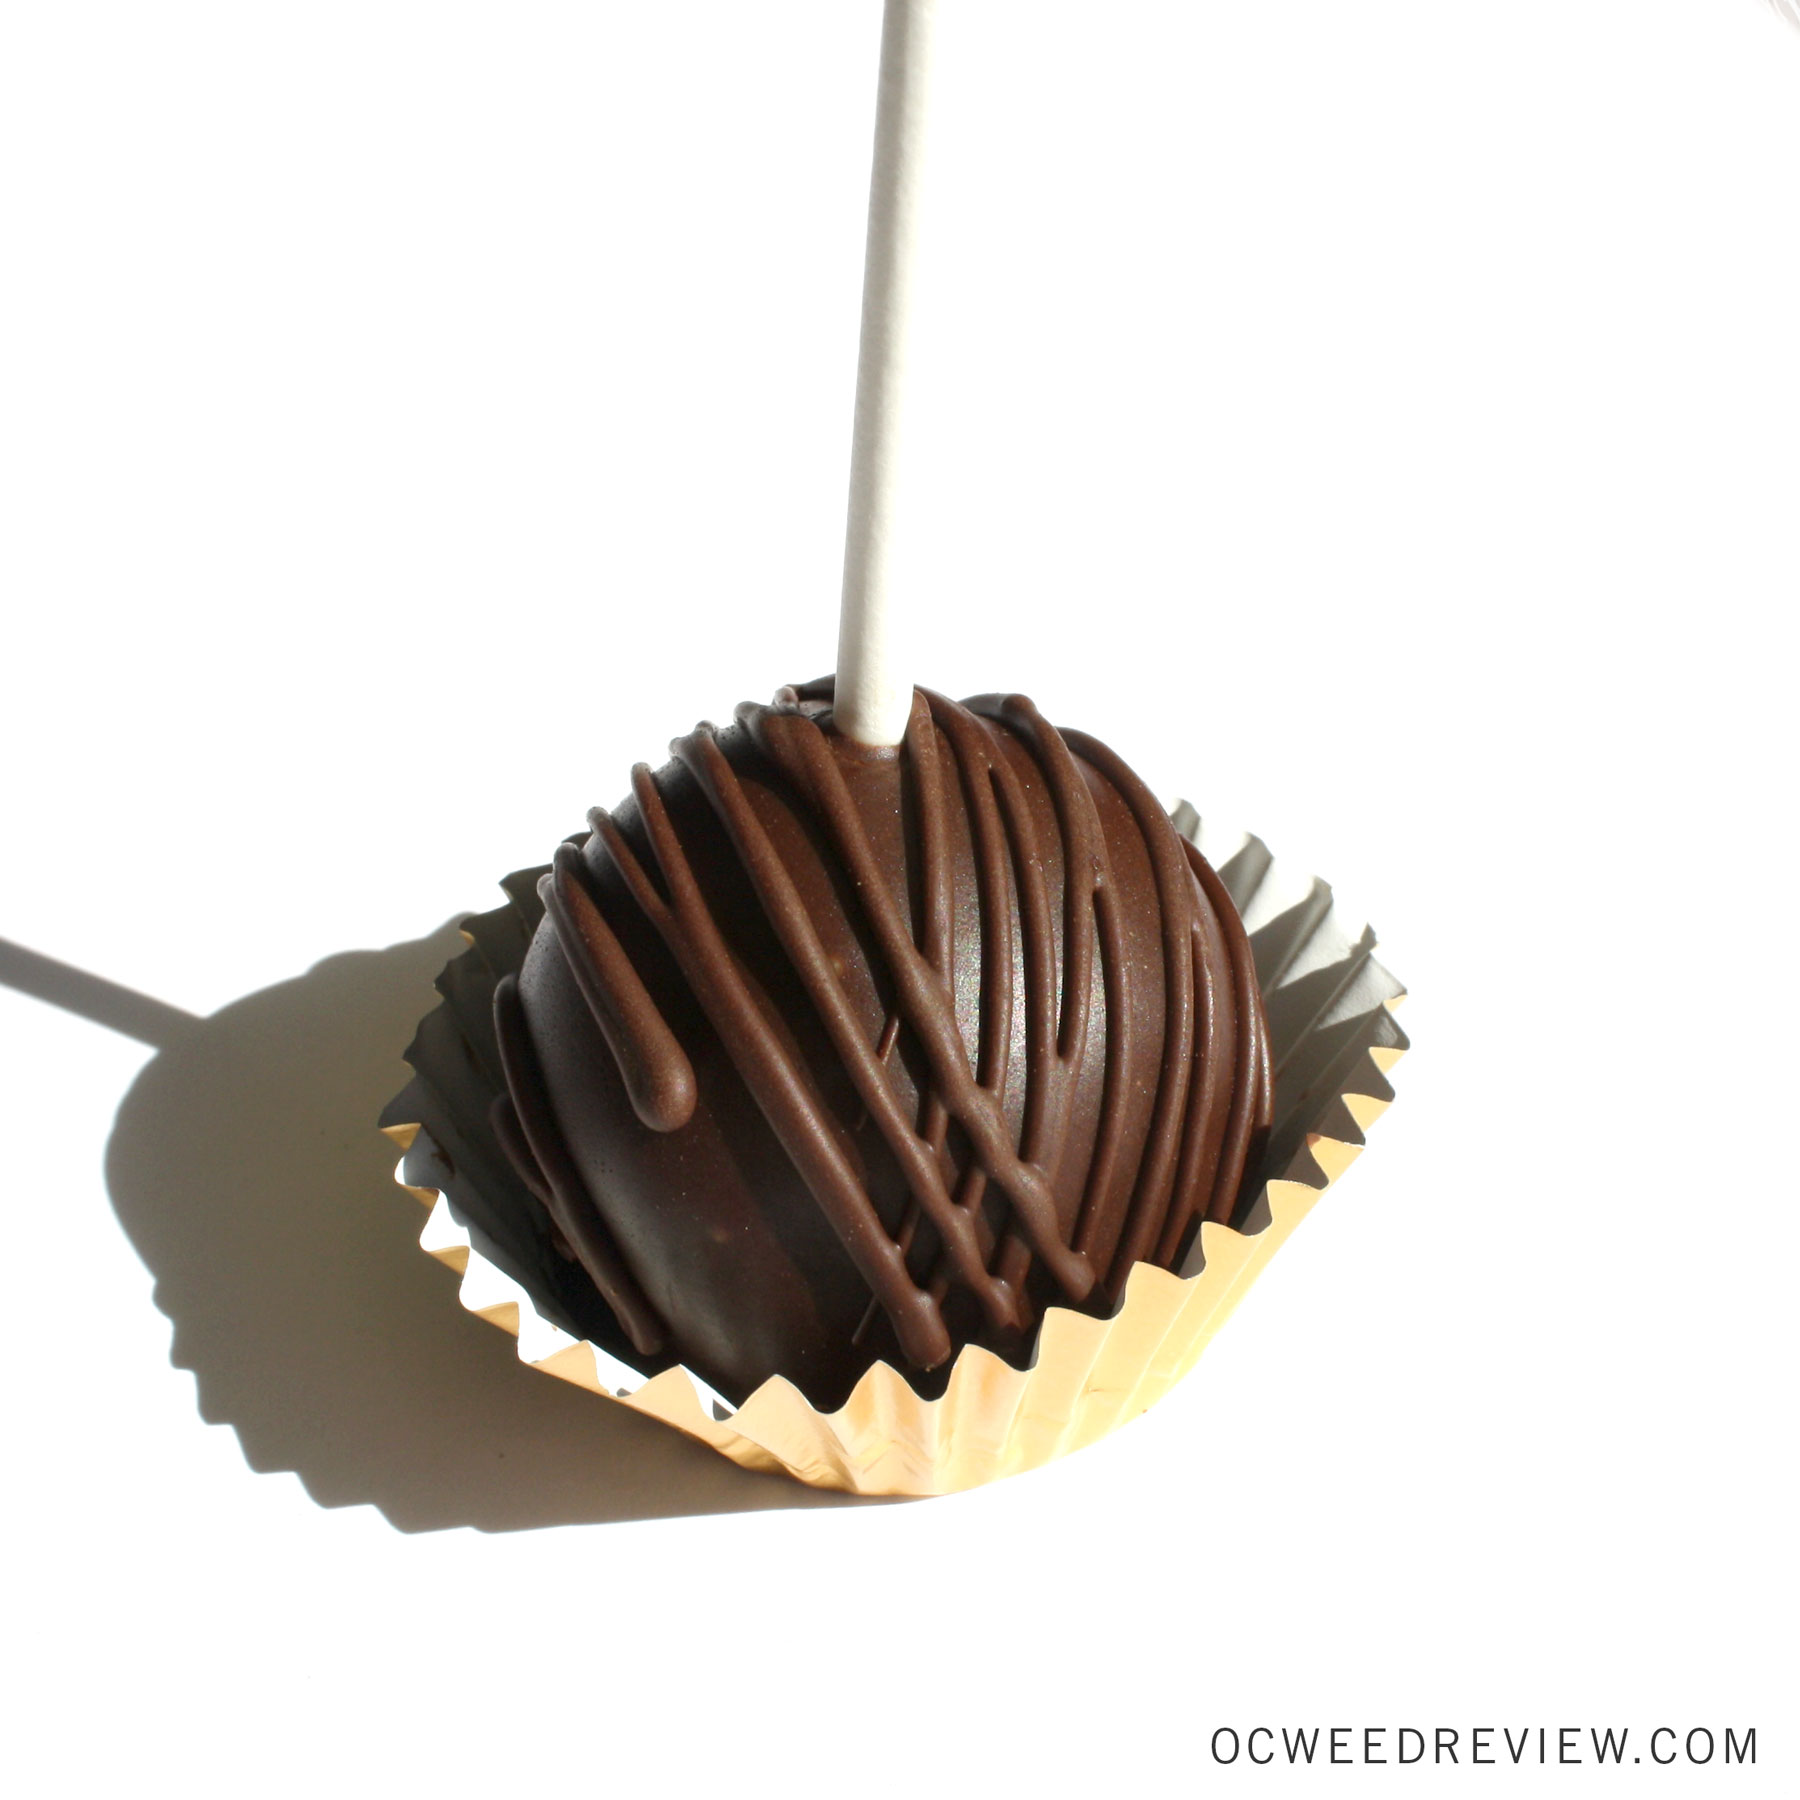 Chocolate Caramel Cake Pops from Miss Mary Jane's Bakeshop Edible Review